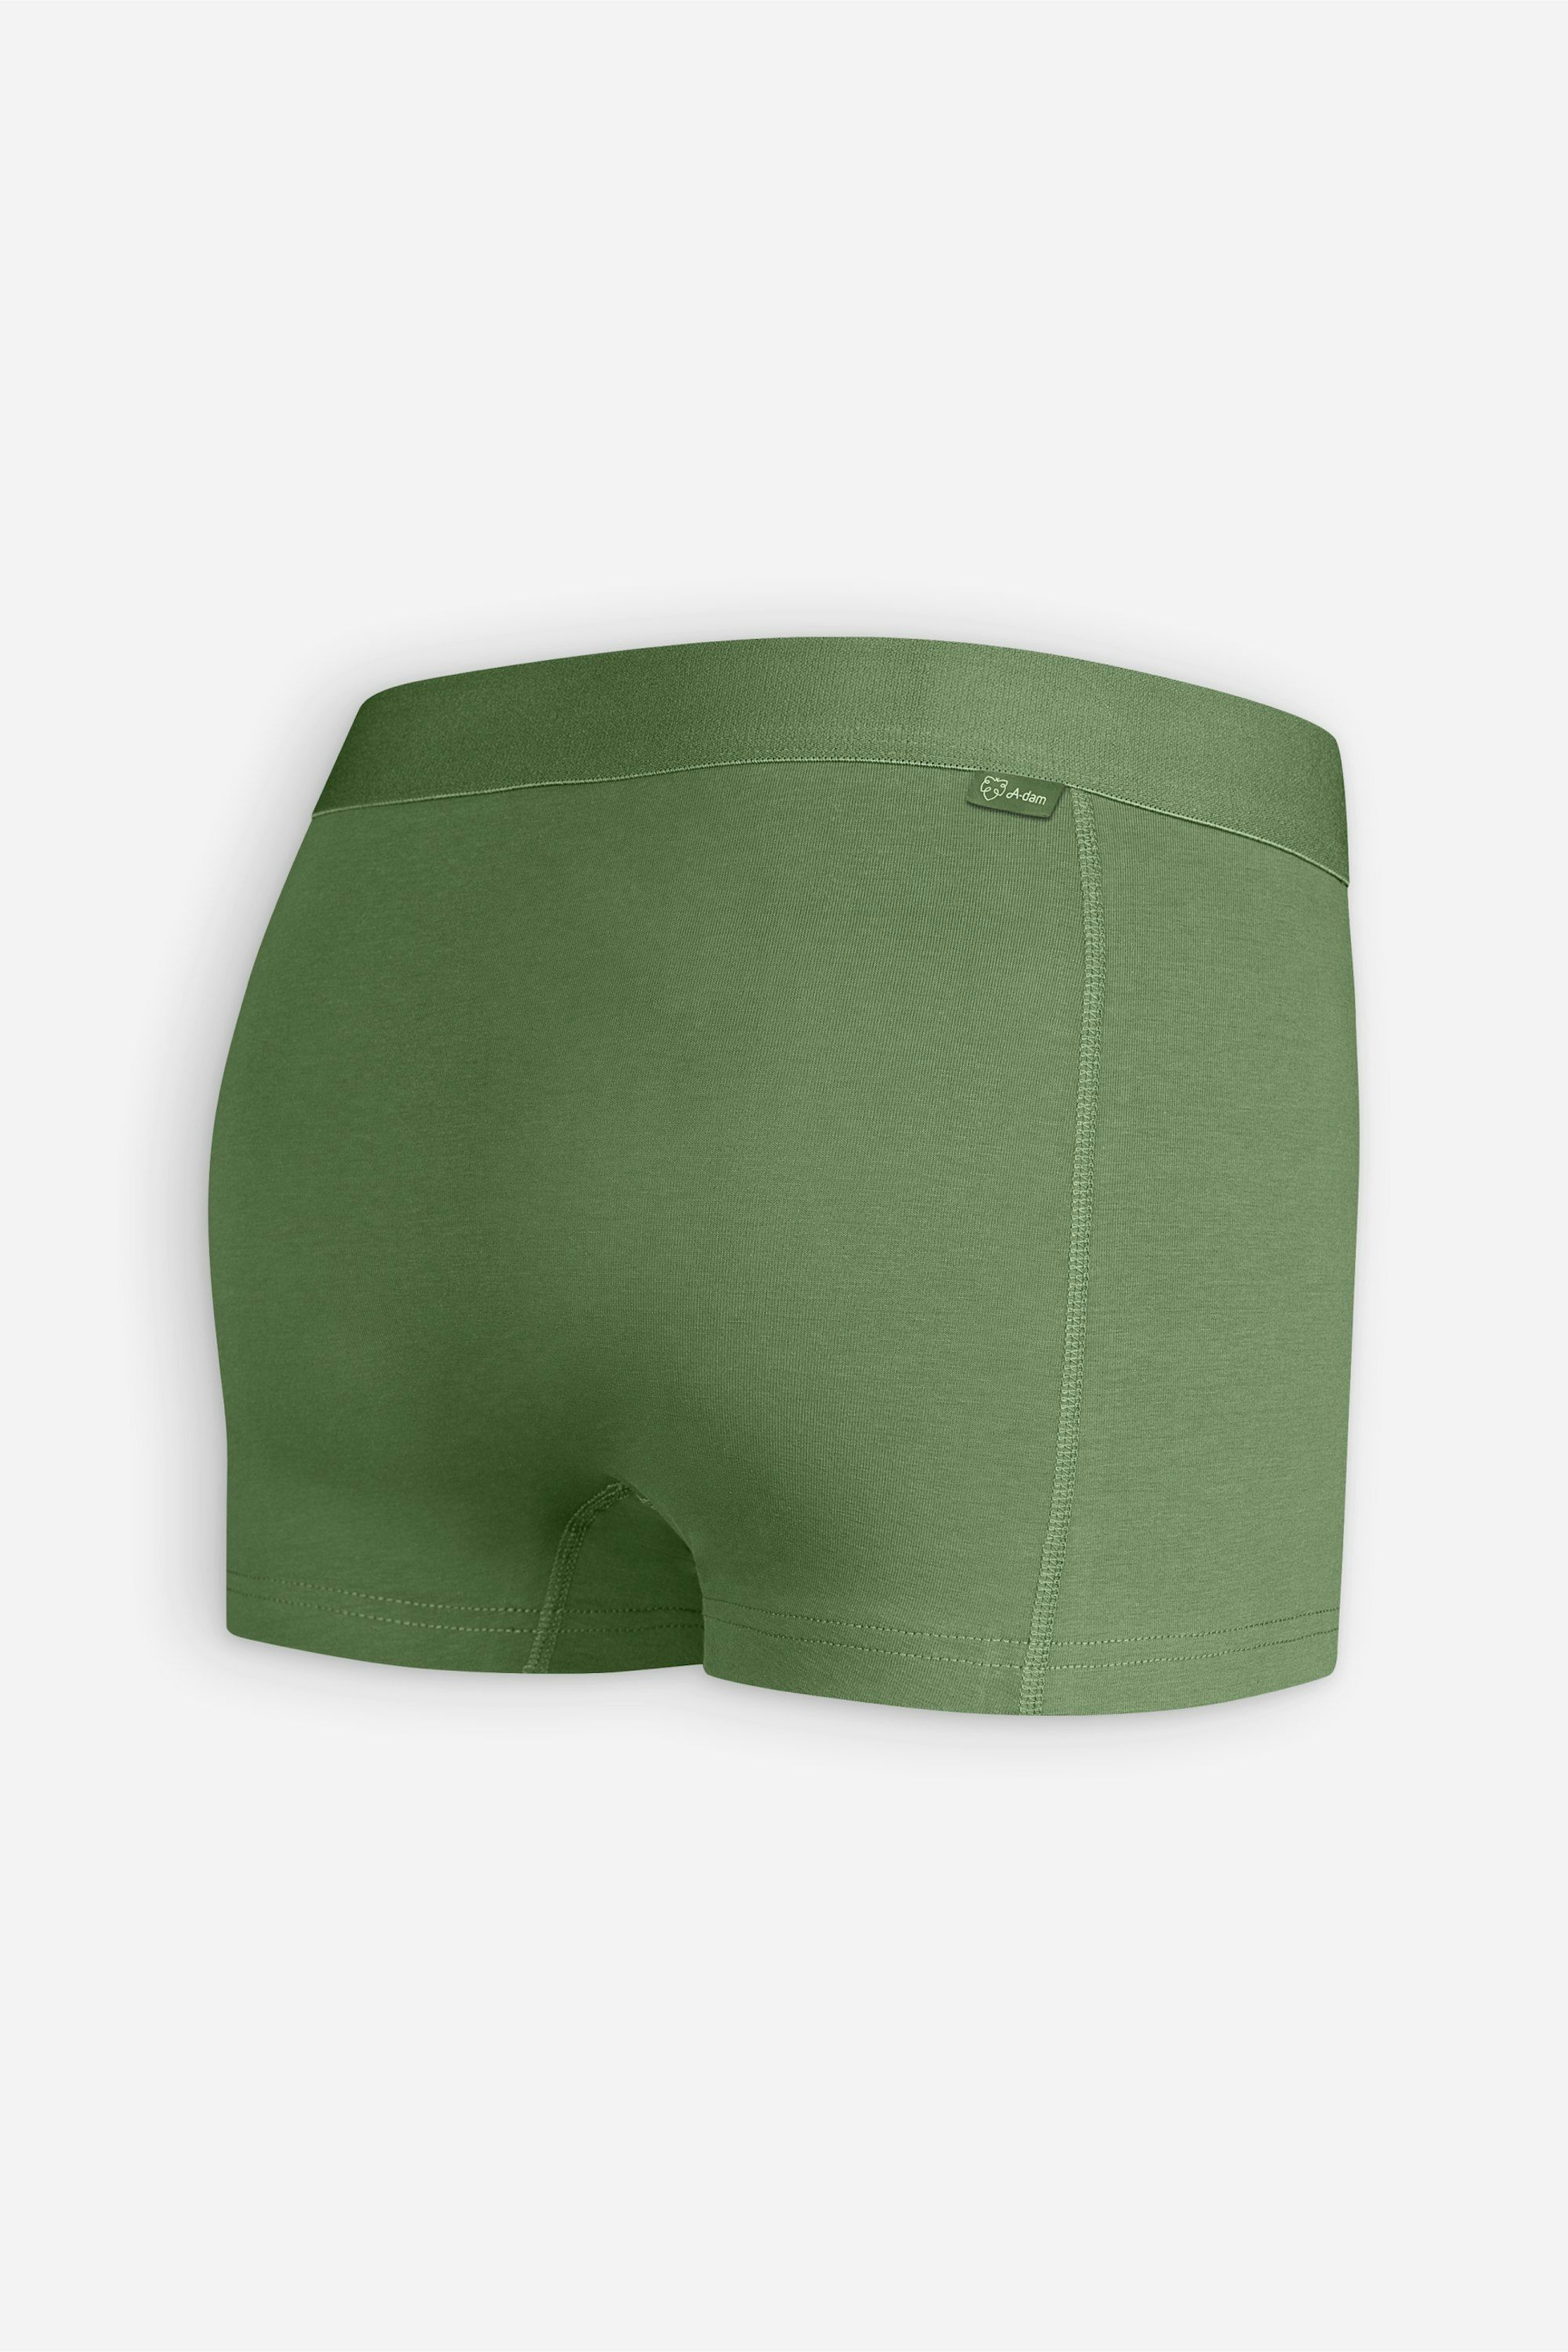 3xSolid Green Trunks